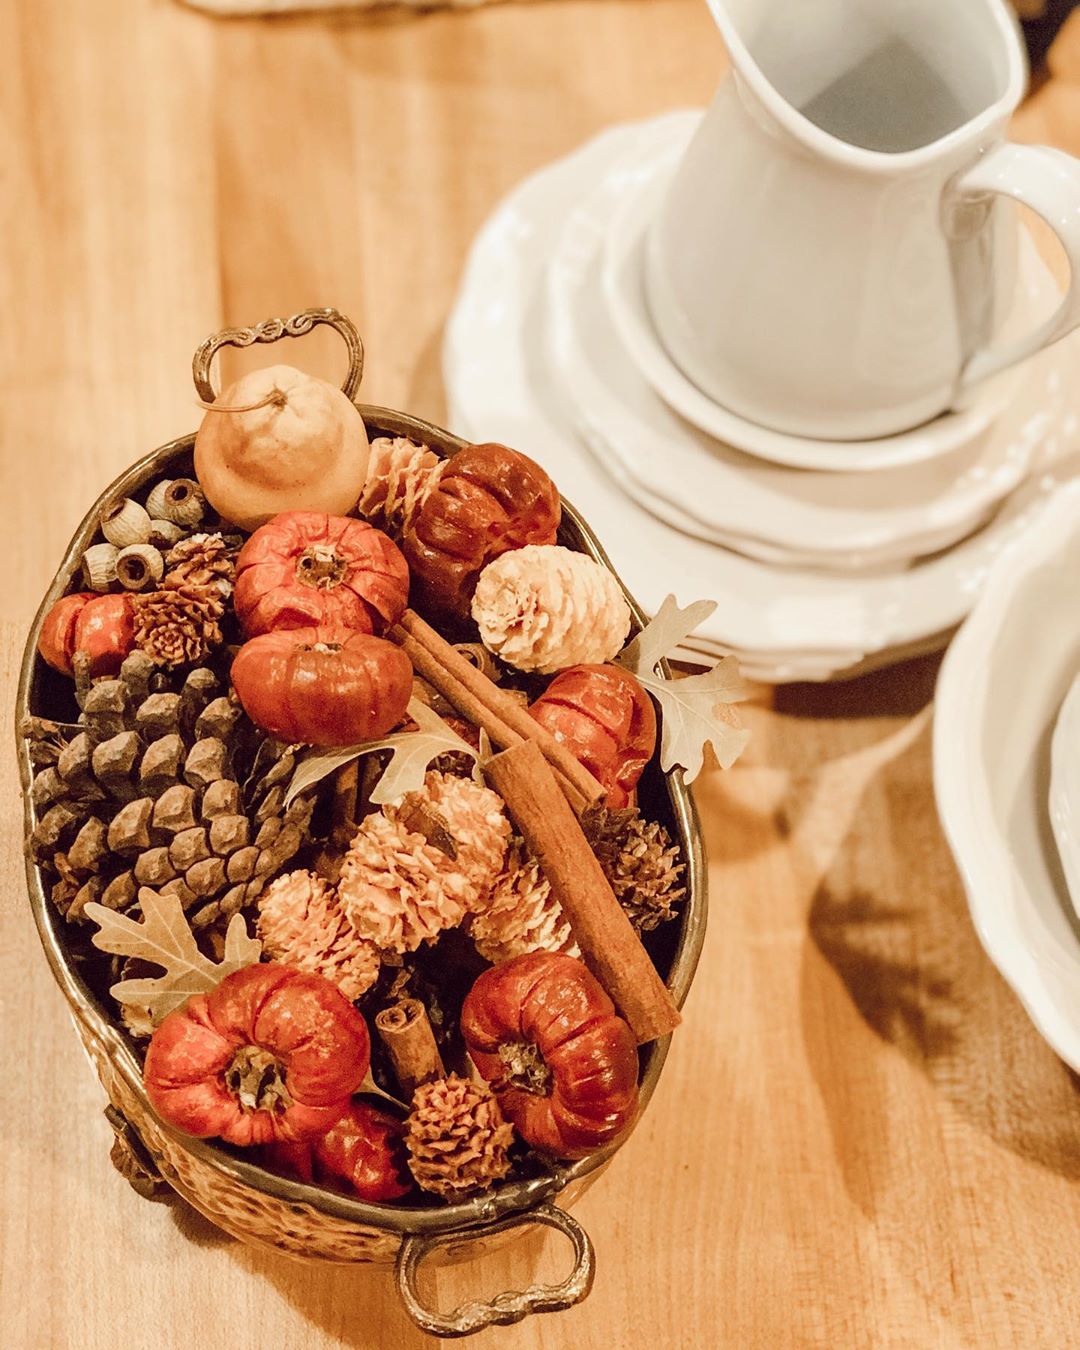 Home Made Potpourri On a Dining Table. Photo by Instagram user @simplyvintagebygayle